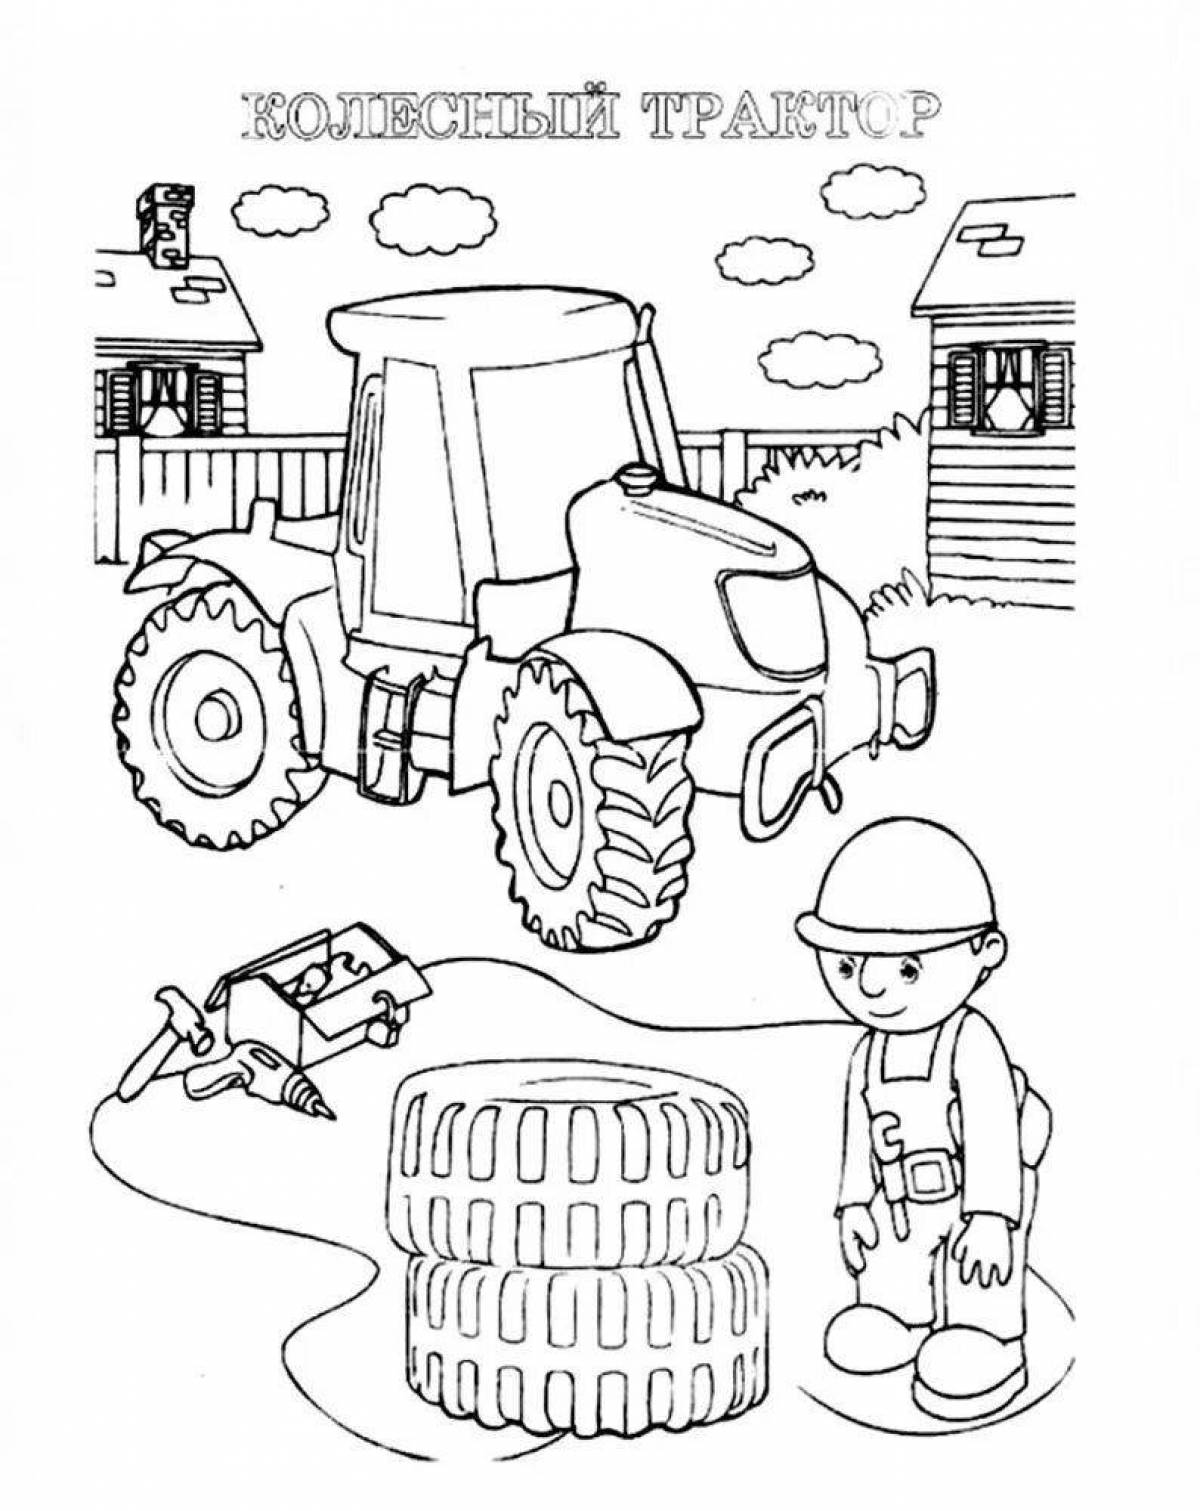 Fun tech coloring pages for kids